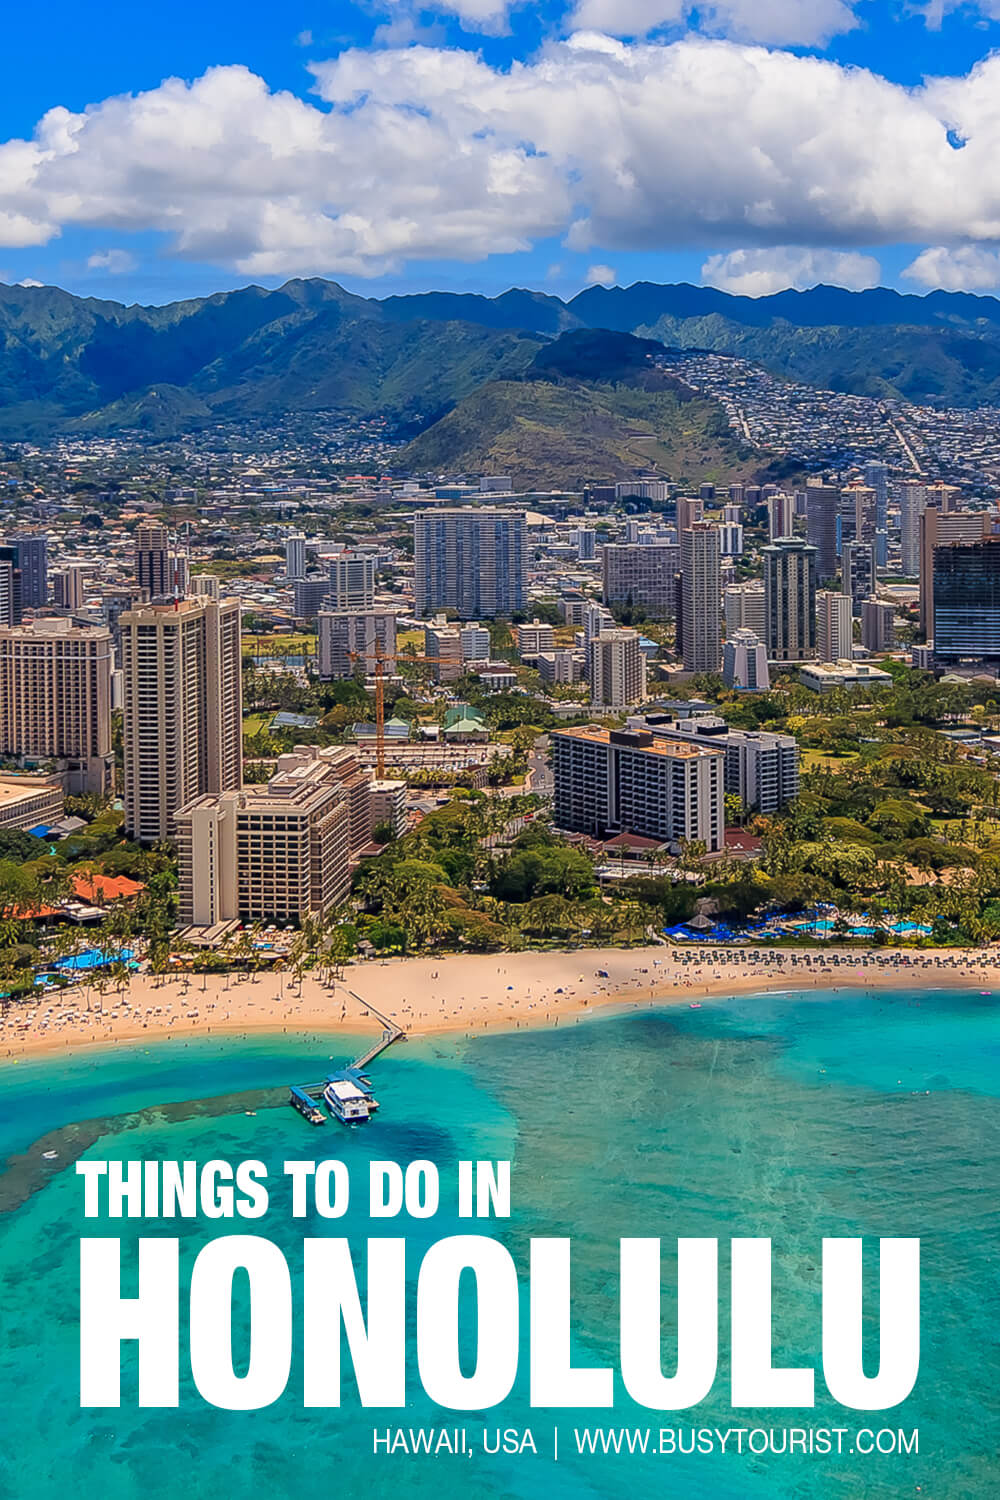 what tourist attractions are in honolulu hawaii